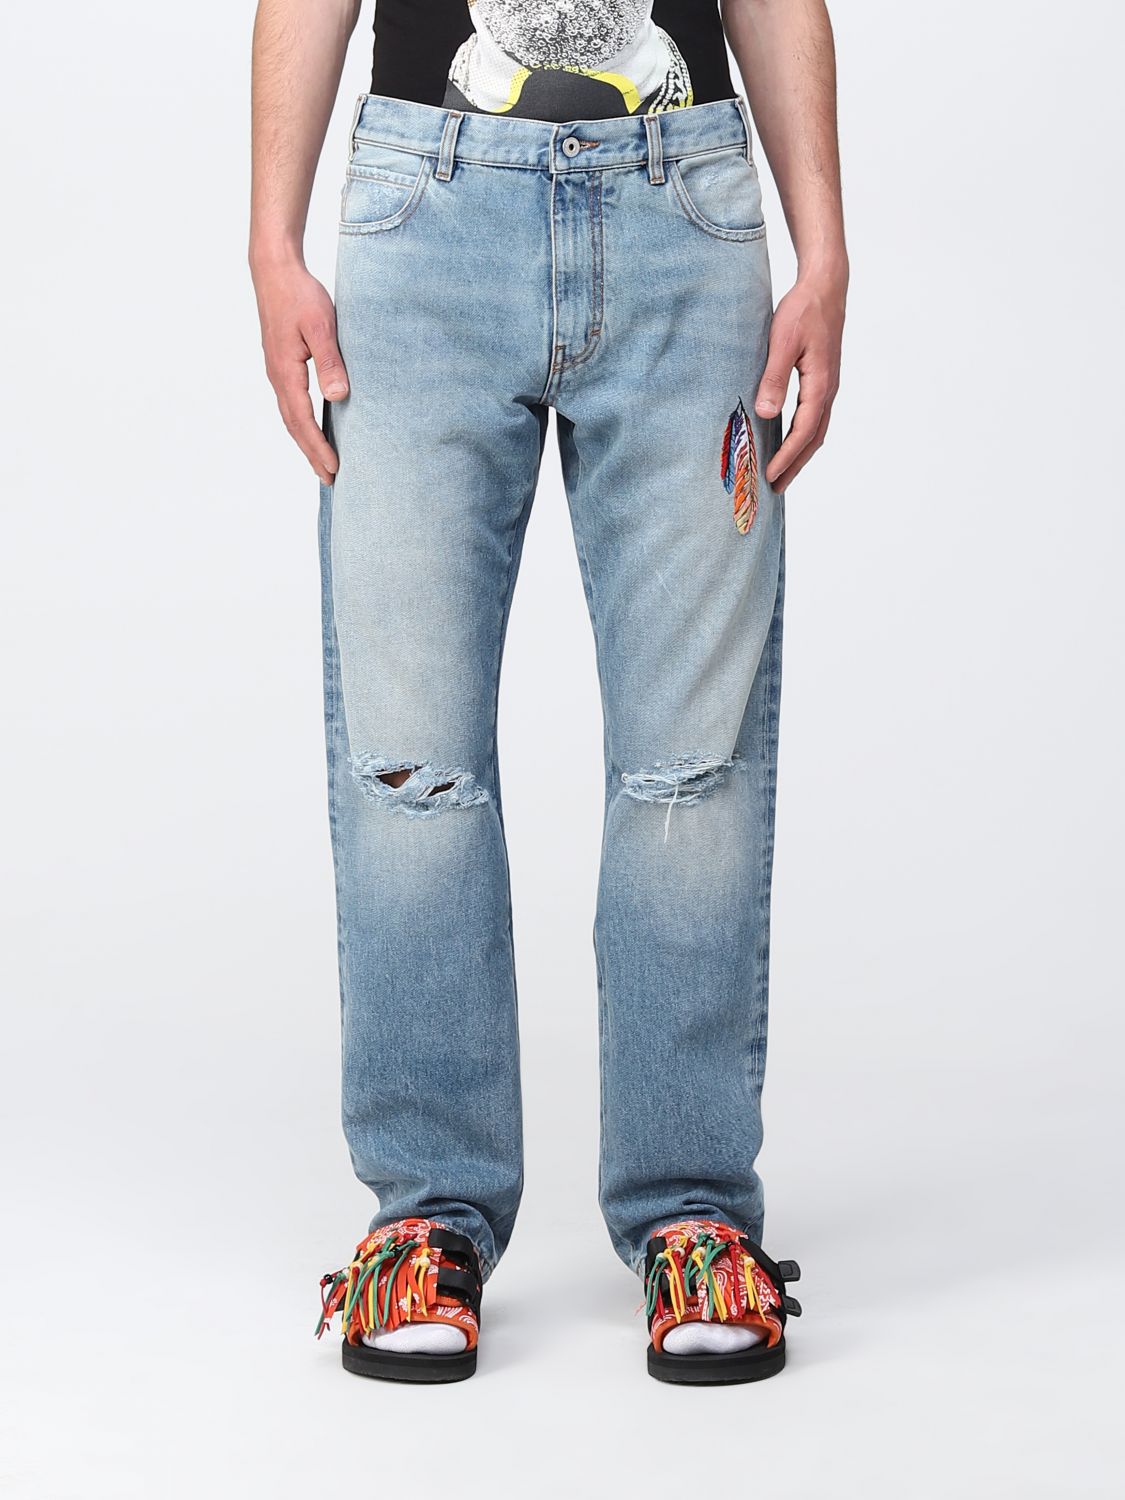 MARCELO BURLON COUNTY OF MILAN COUNTY OF MILAN JEANS IN WASHED DENIM,D07306009